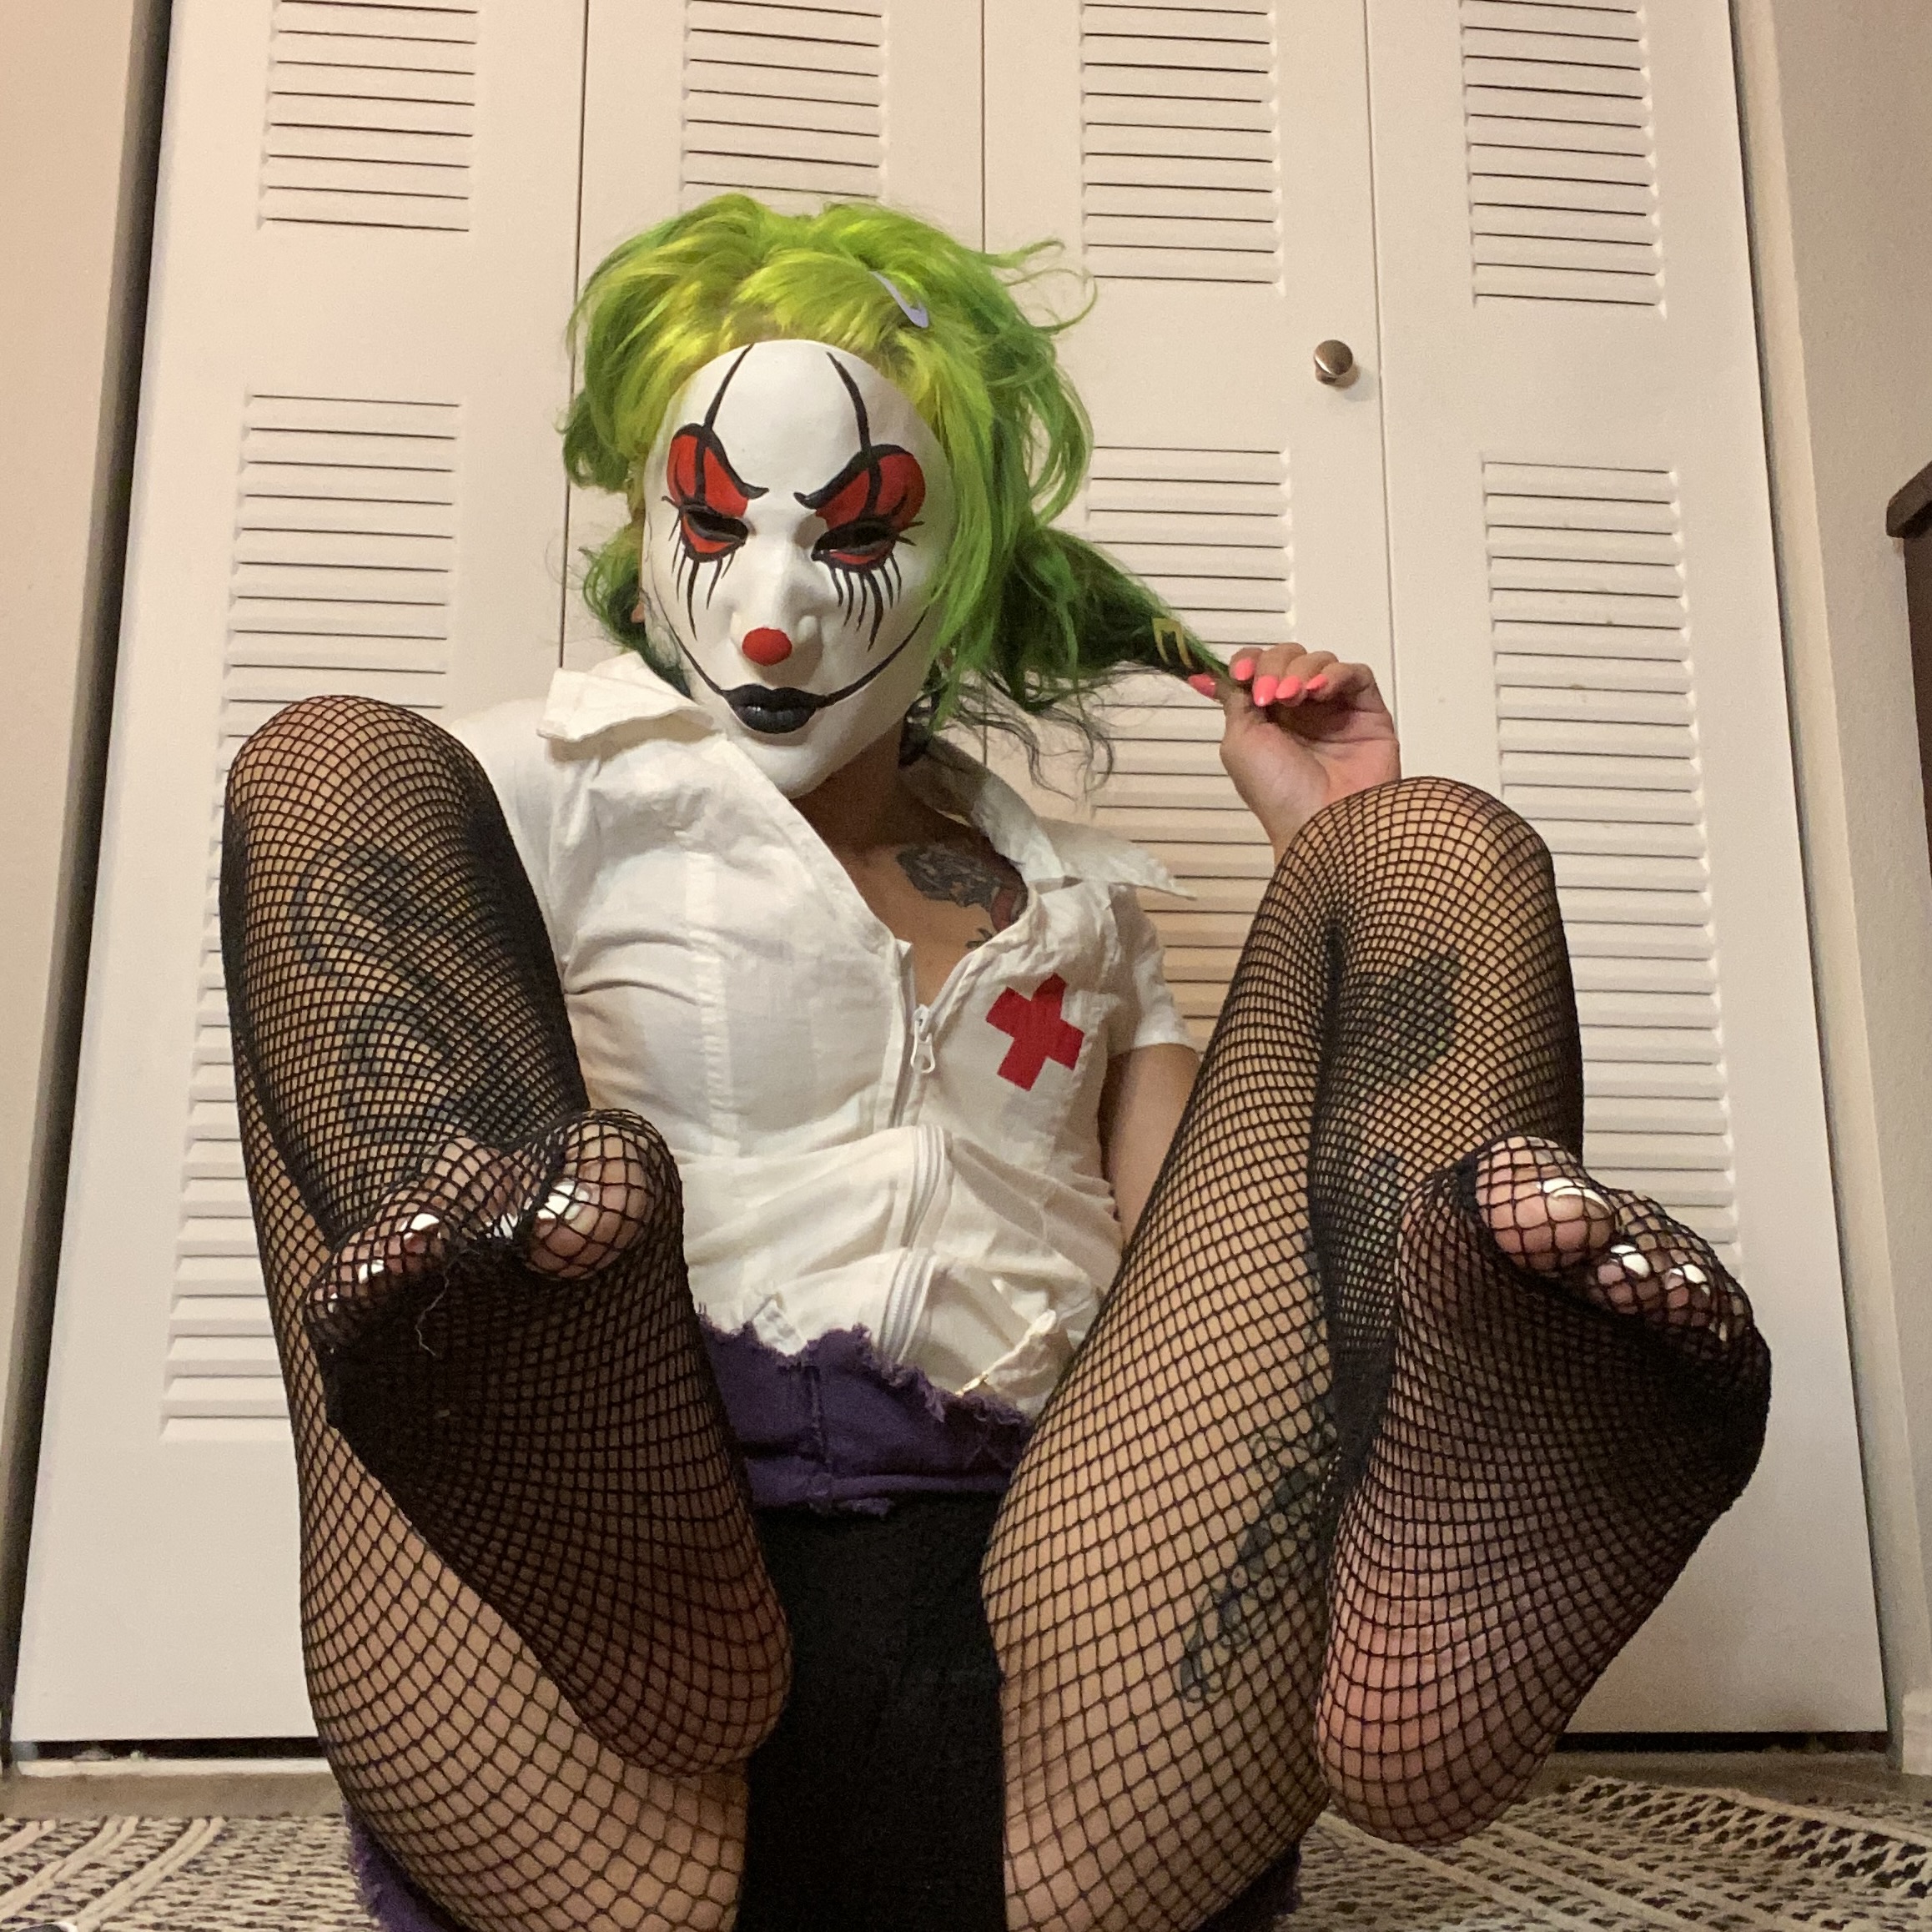 Sexy Scary Clown - Clown Videos, Photos And Other Content and Other Amateur Porn Content on ELM